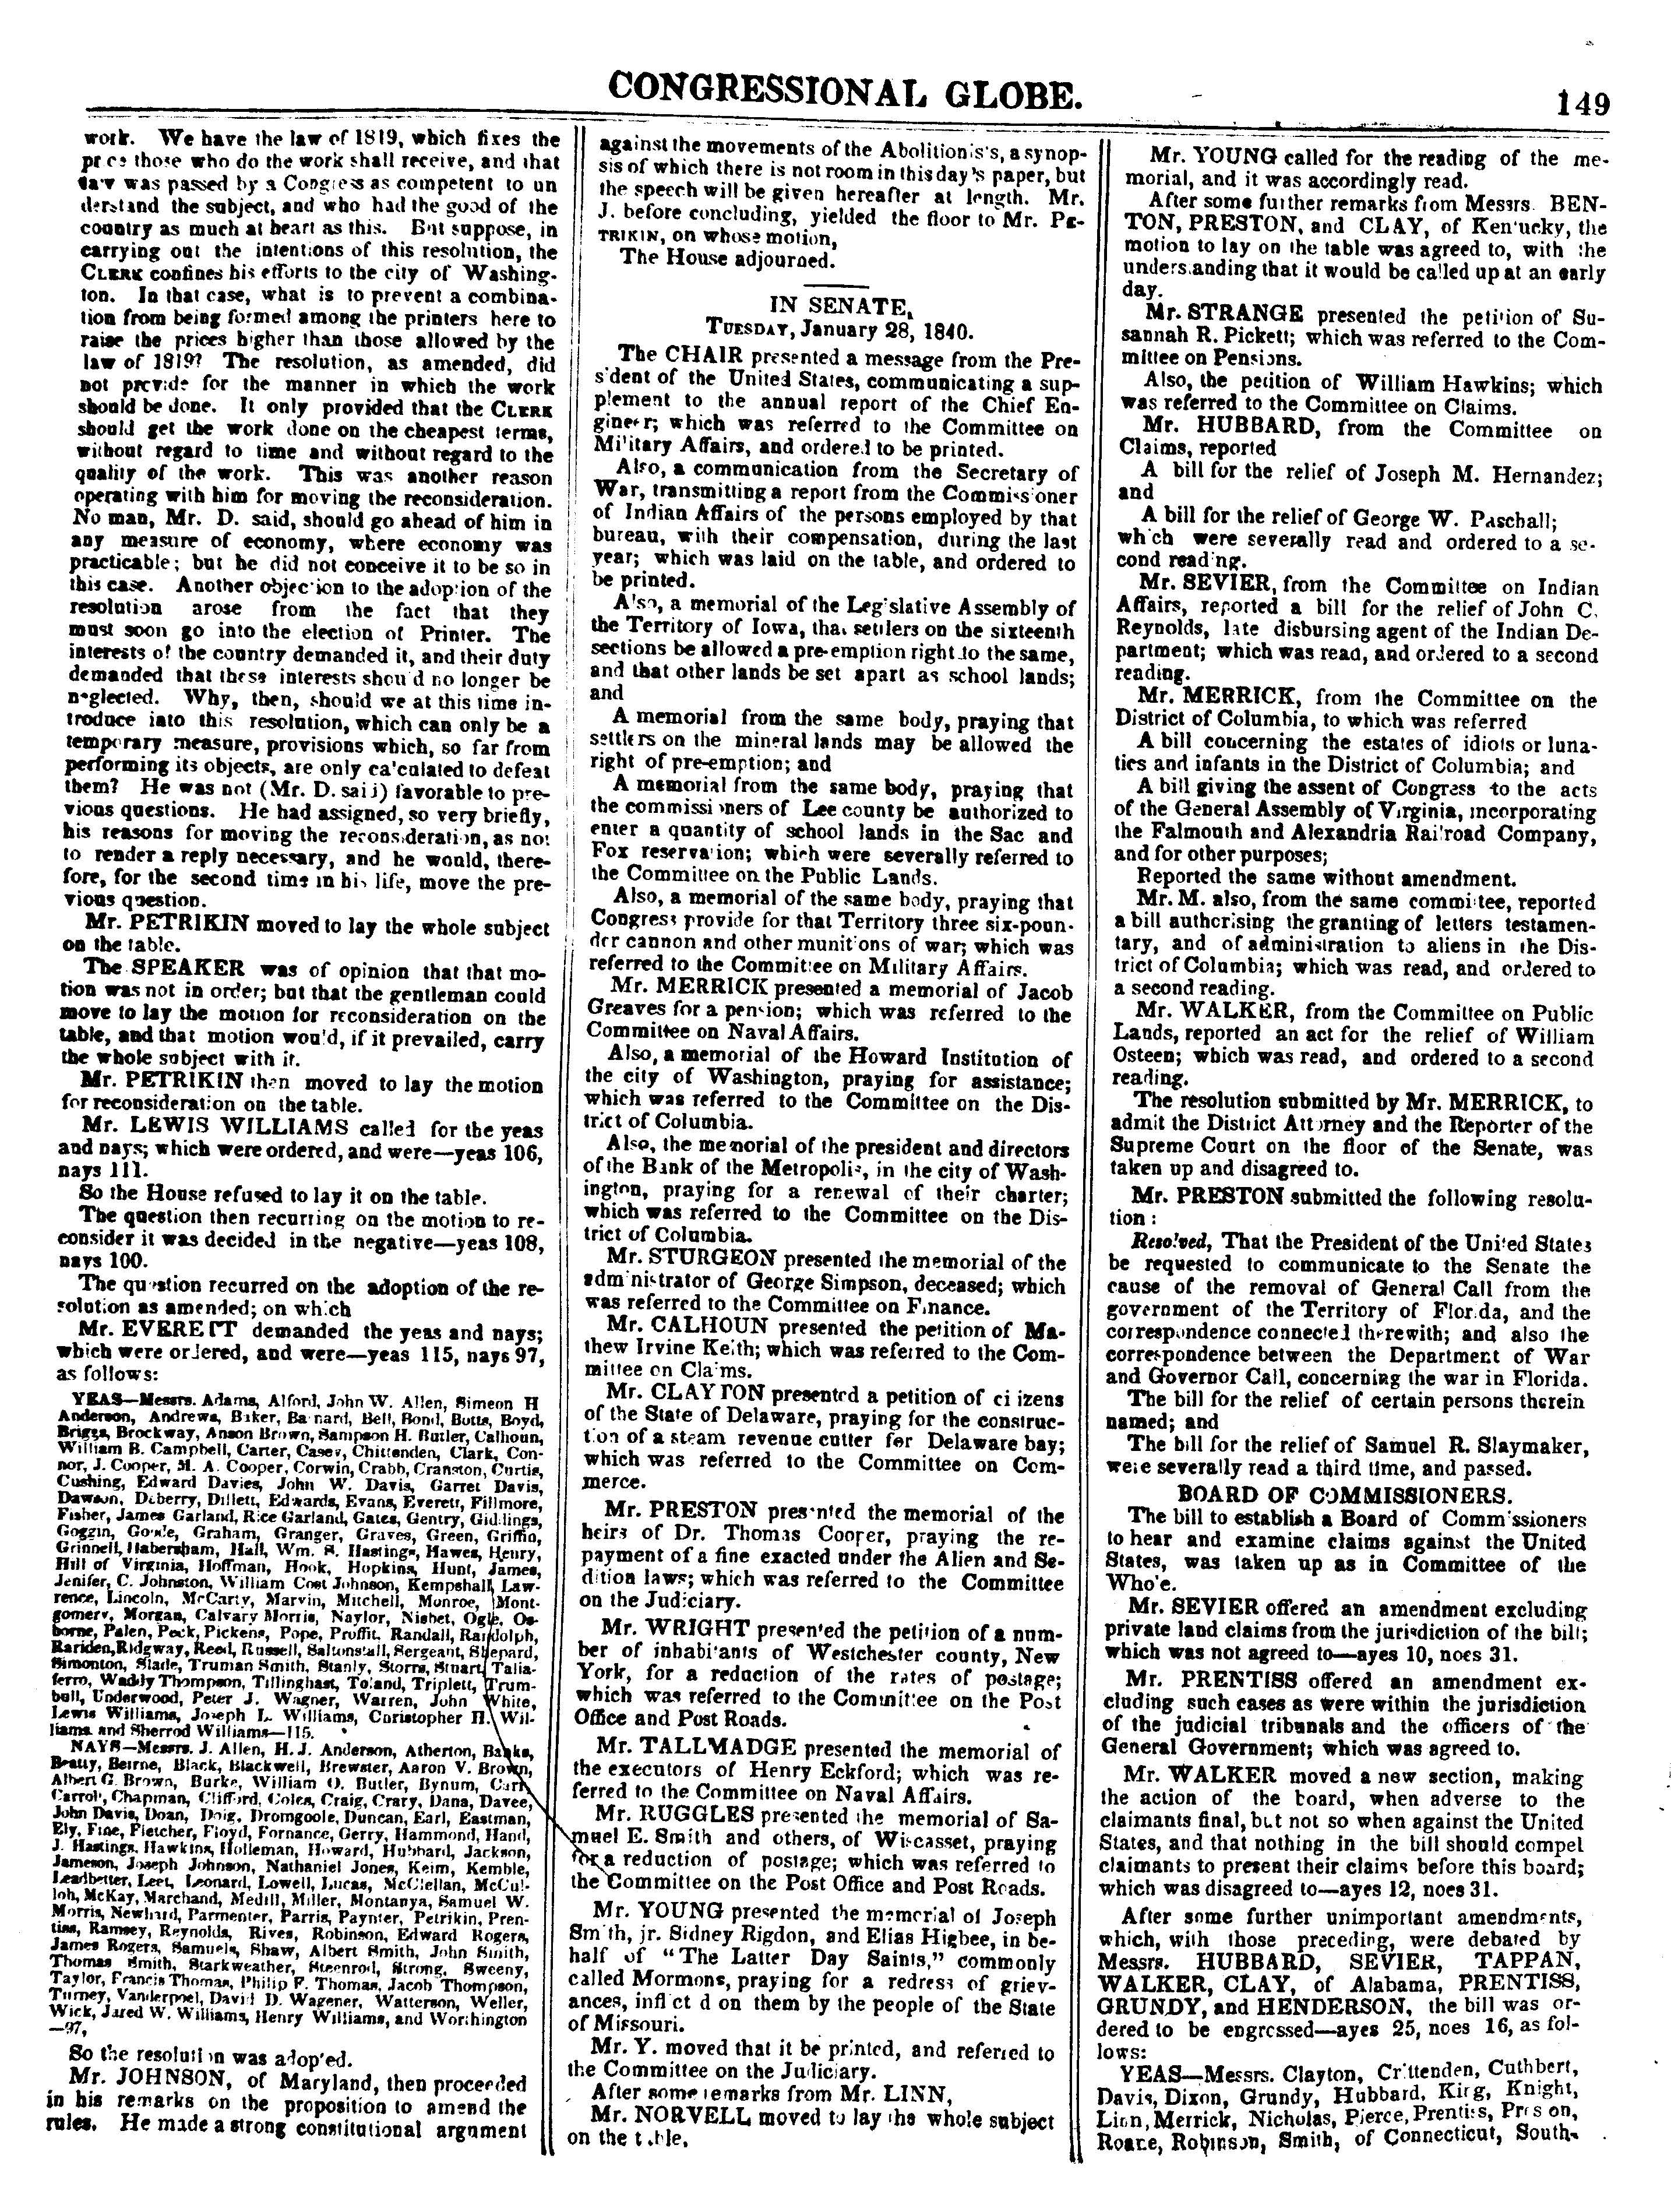 Coverage of congressional discussions about the Latter-day Saints memorial and abolition petitions in the Congressional Globe, 28 January 1840. Library of Congress.